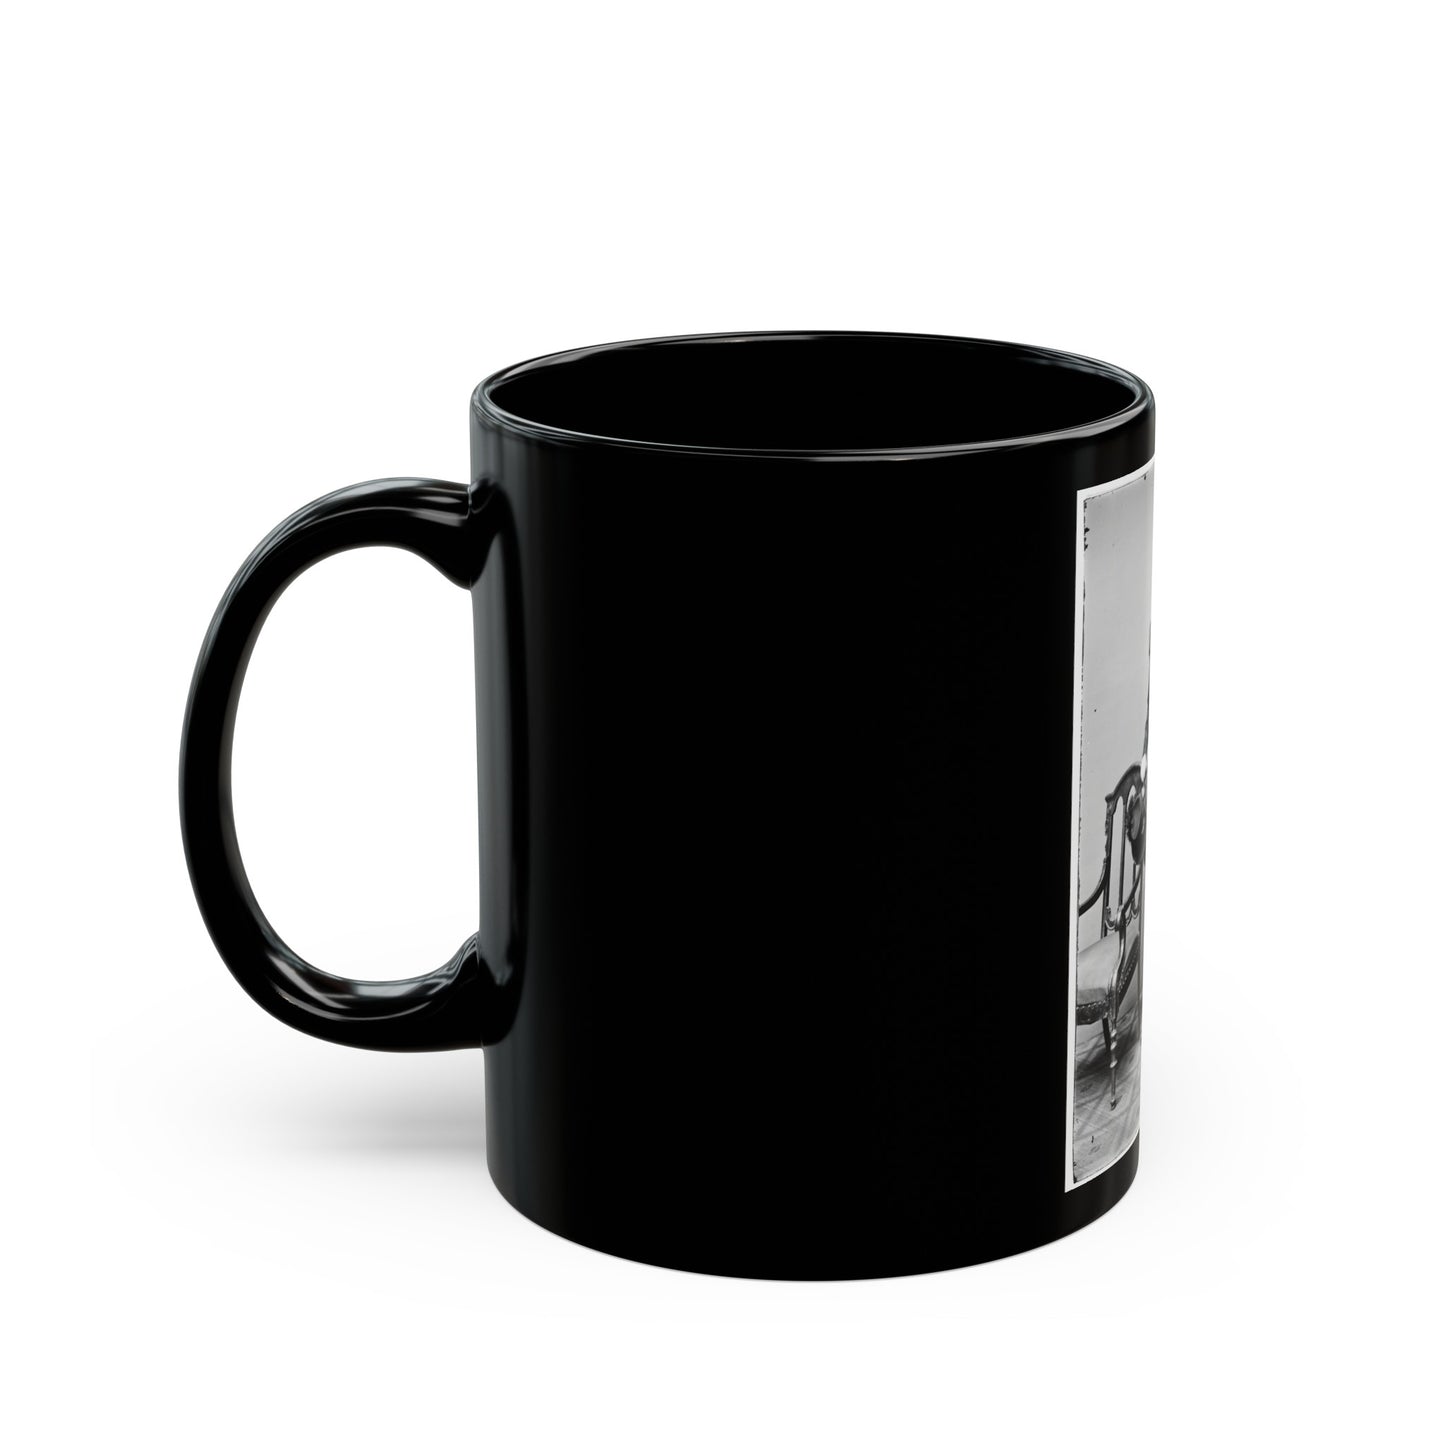 Portrait Of Capt. Charles Griffin, Officer Of The Federal Army, (Brig. Gen. From June 9, 1862) (U.S. Civil War) Black Coffee Mug